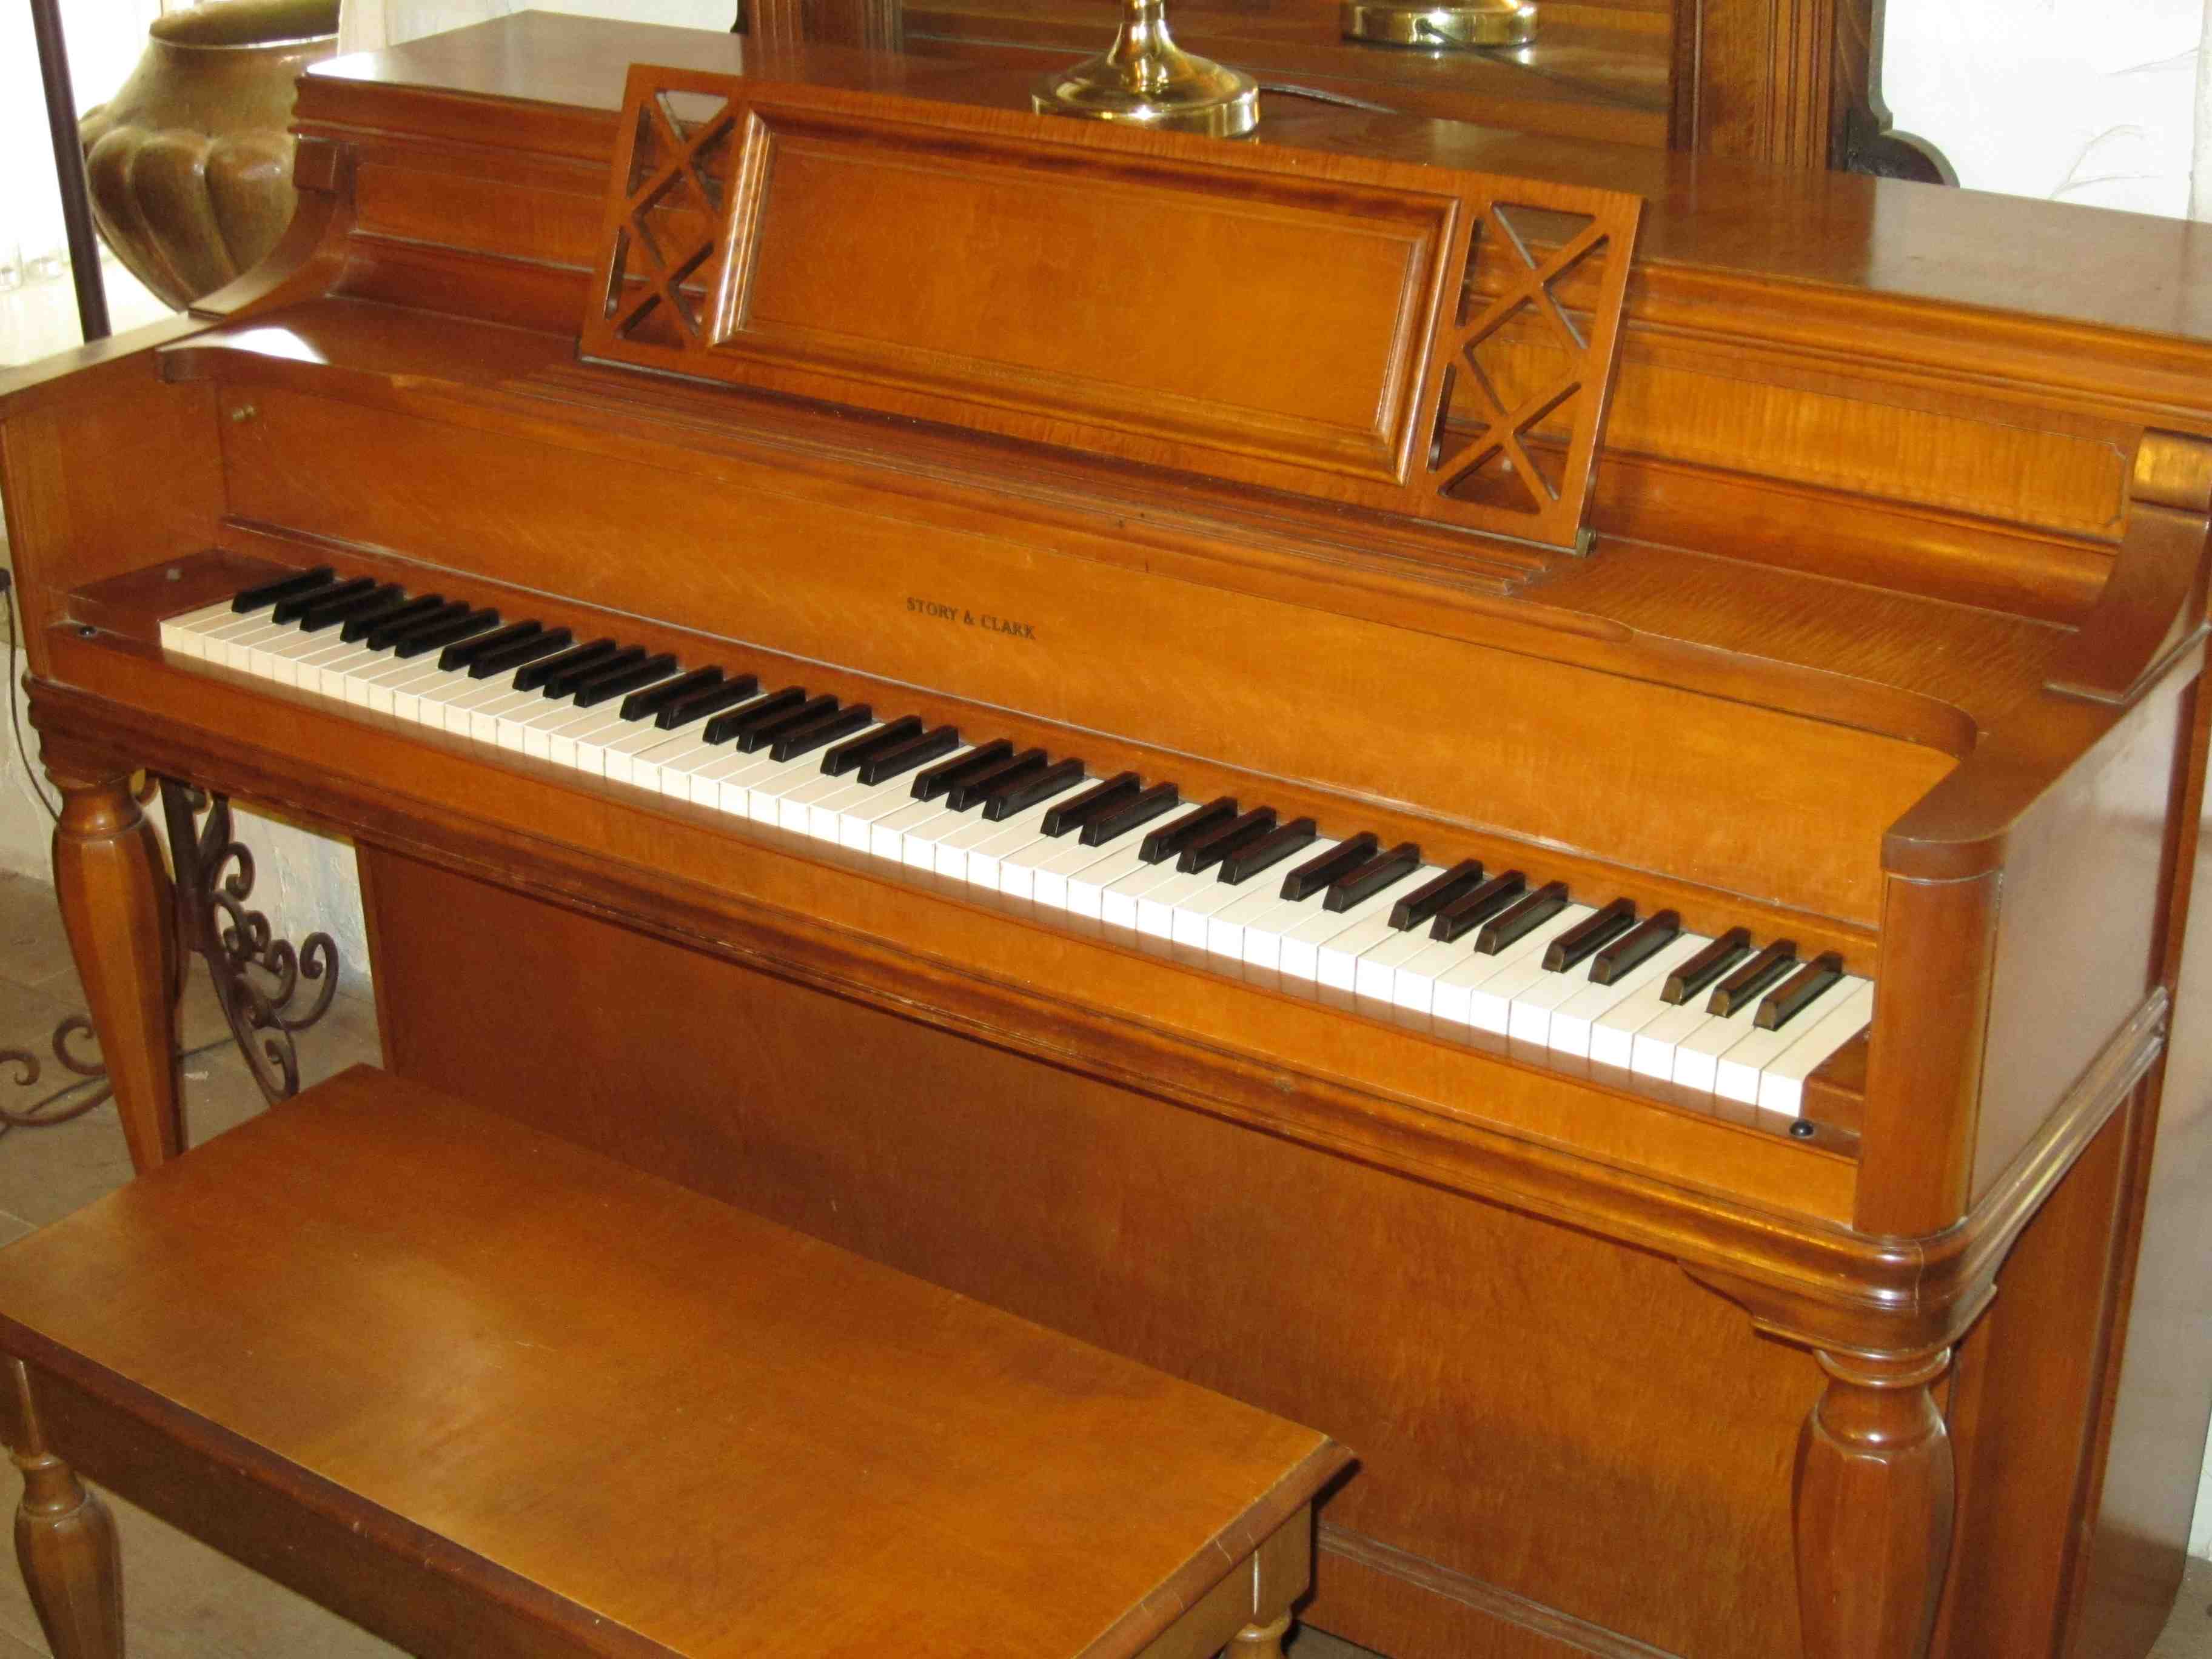 Classical music lesson at a ranch: Bad pianos can make you play ...